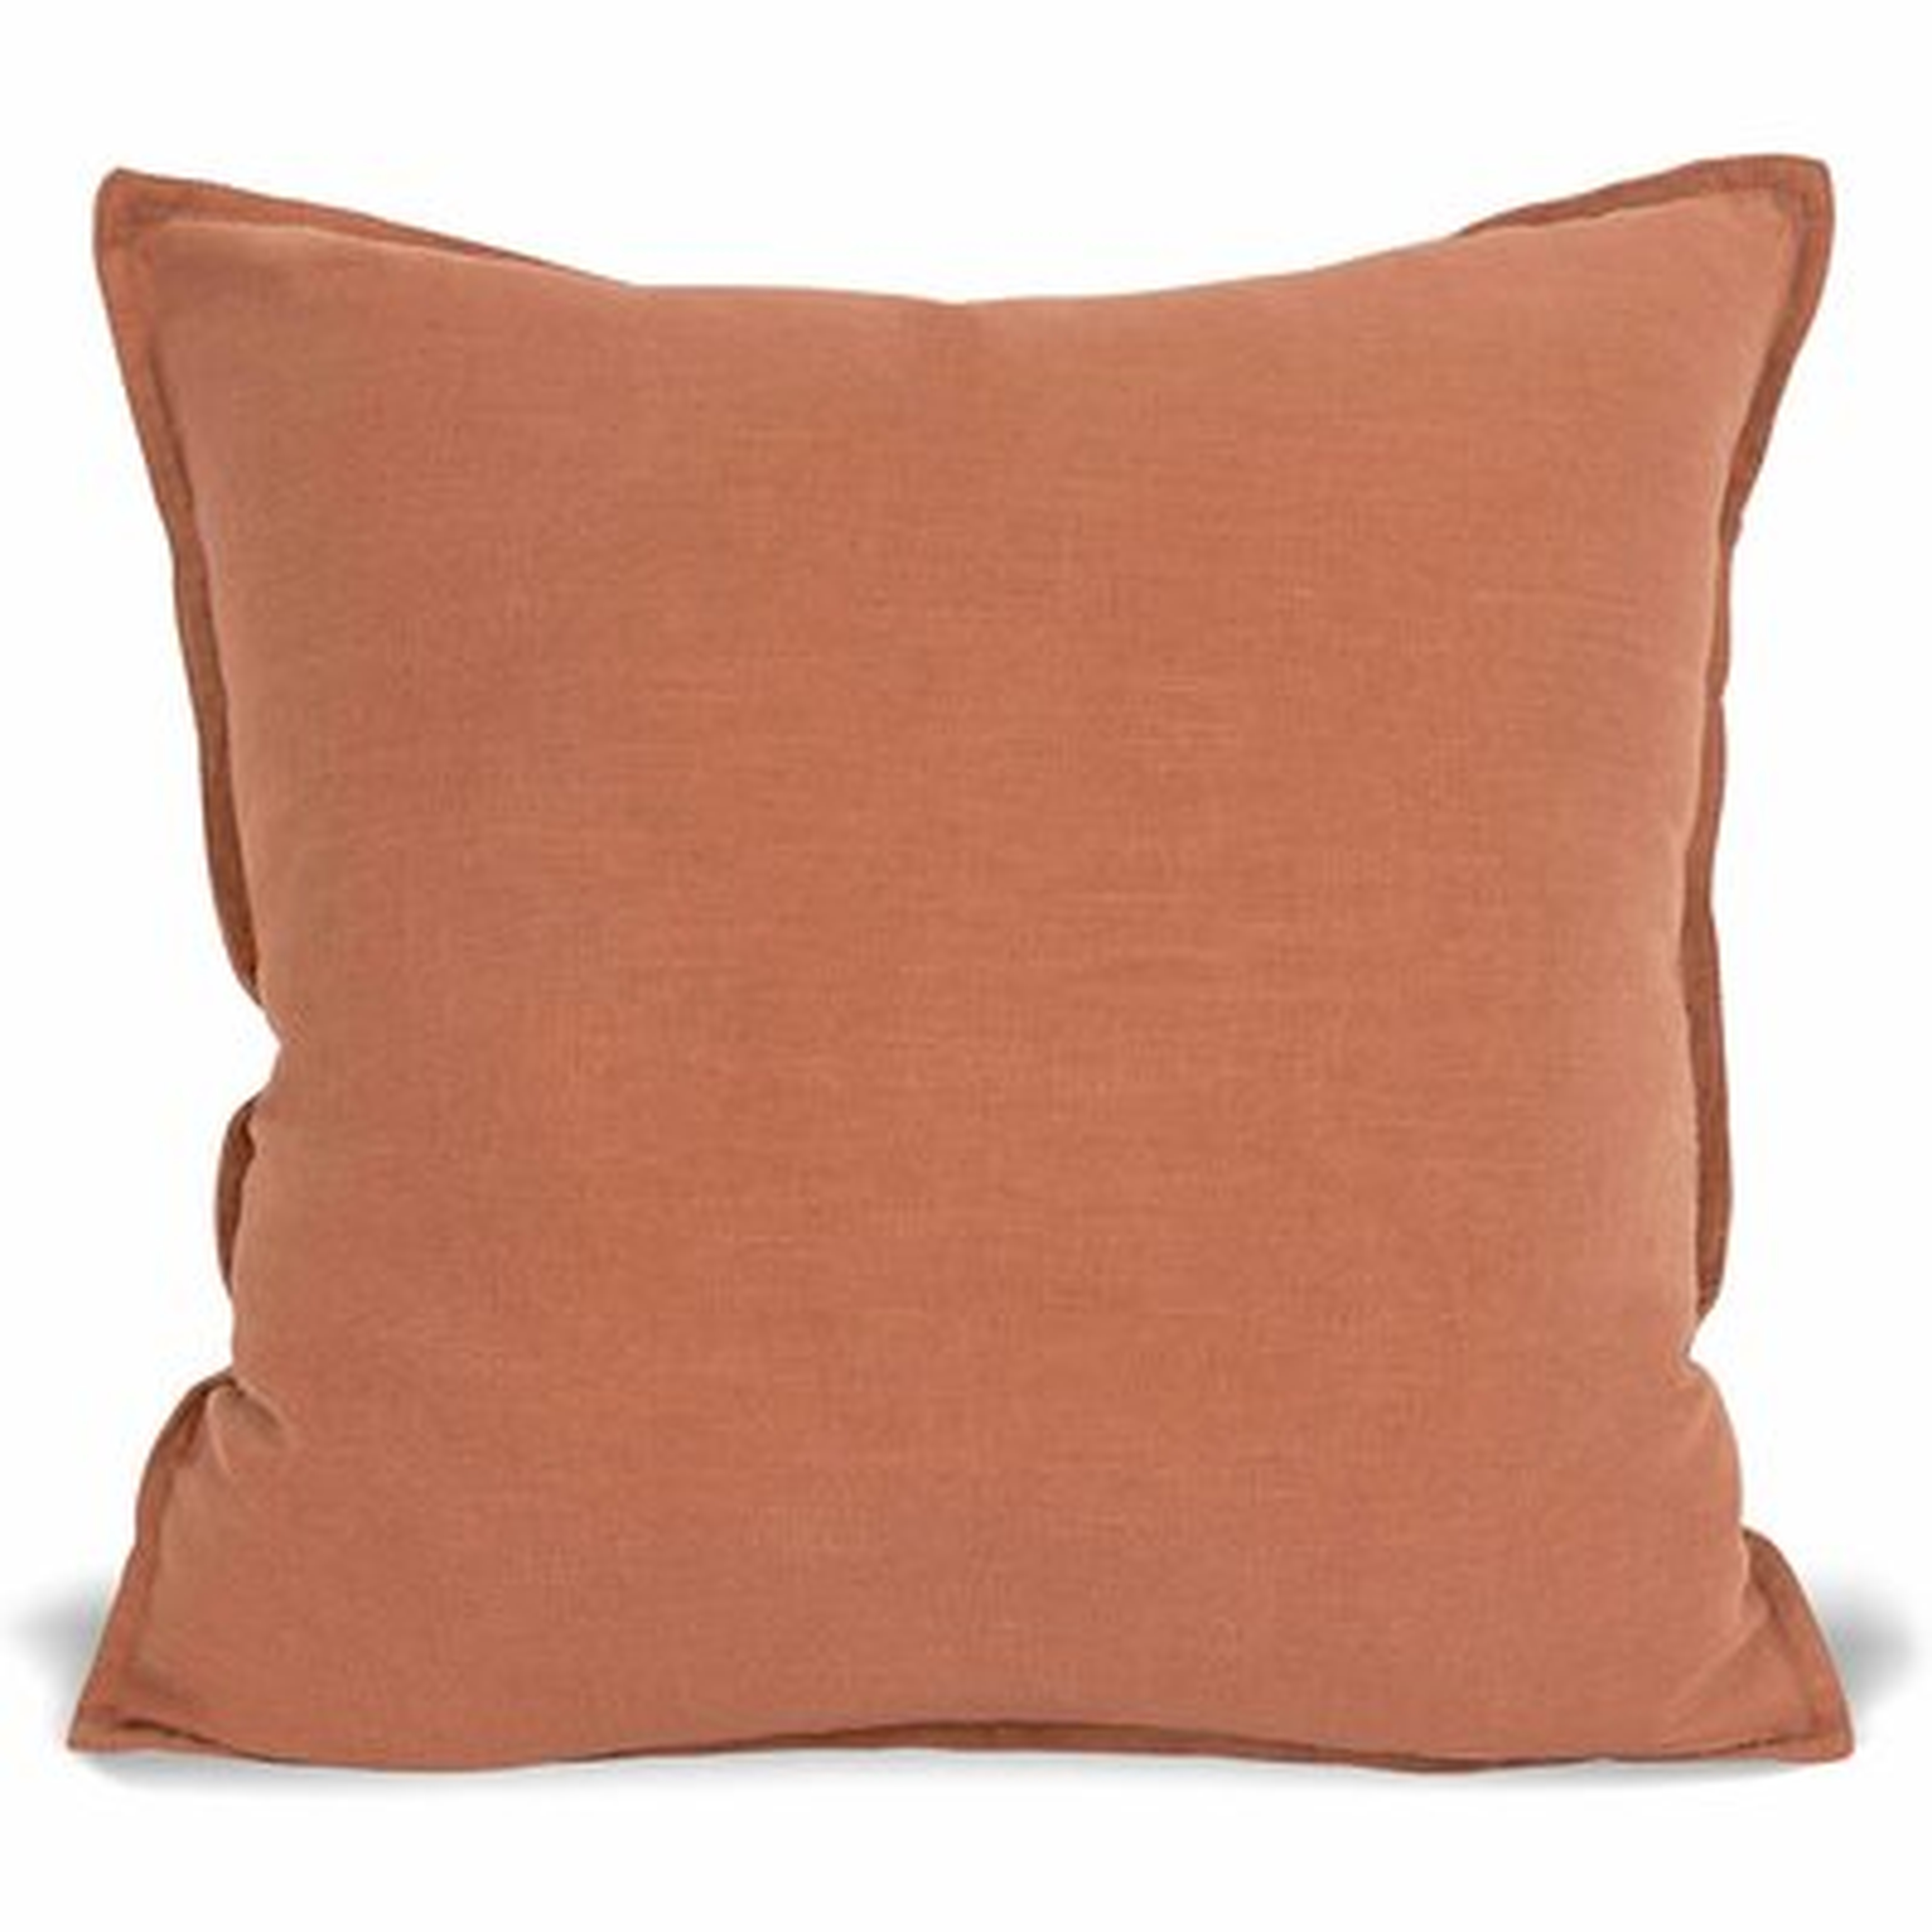 Cleothis Square Pillow Cover & Insert - Wayfair